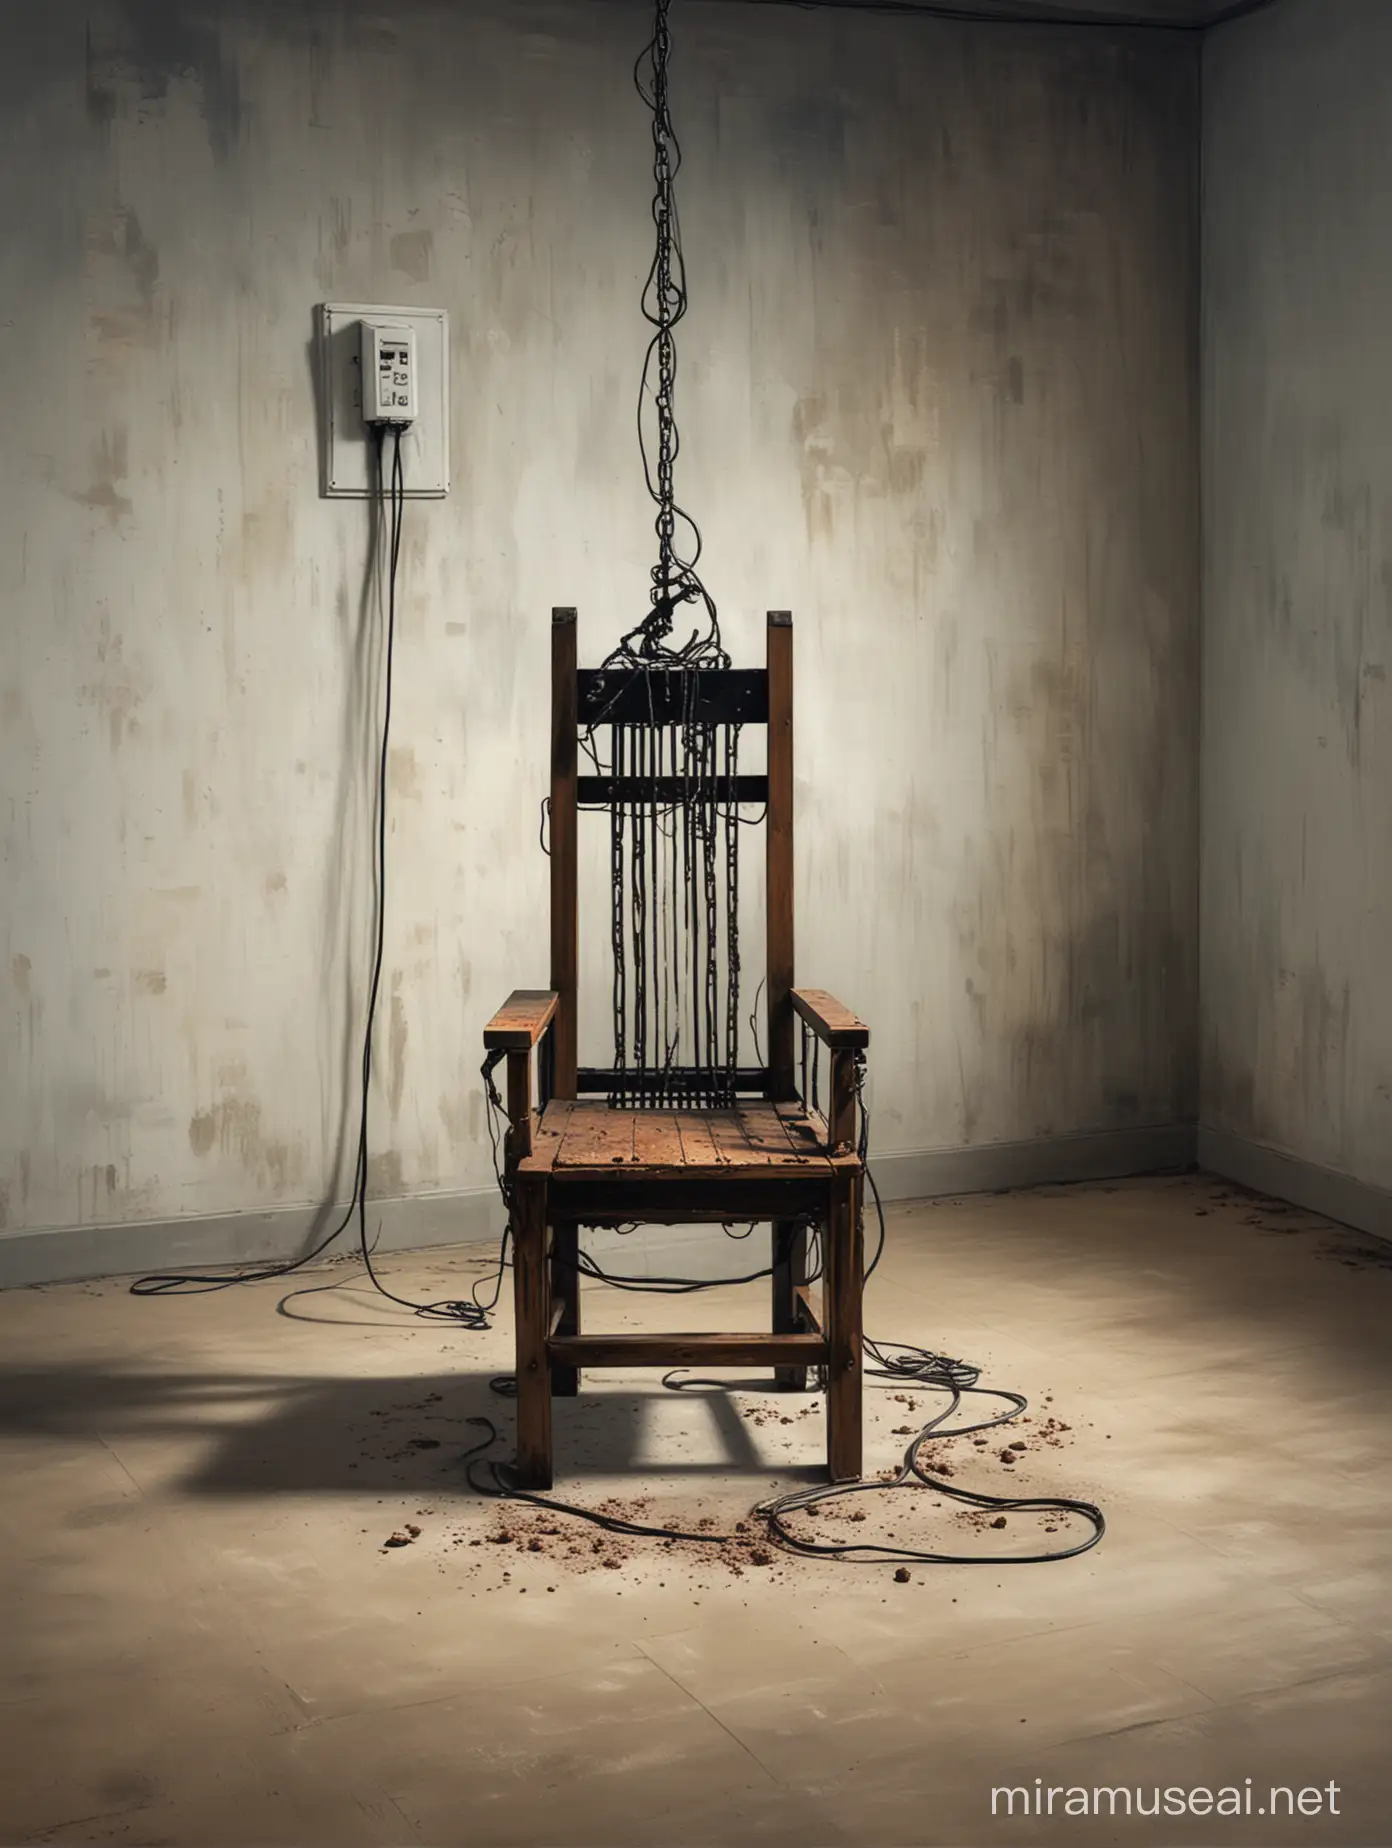 Electric Chair Execution Portrayal of Fear and Anxiety in Modern Art